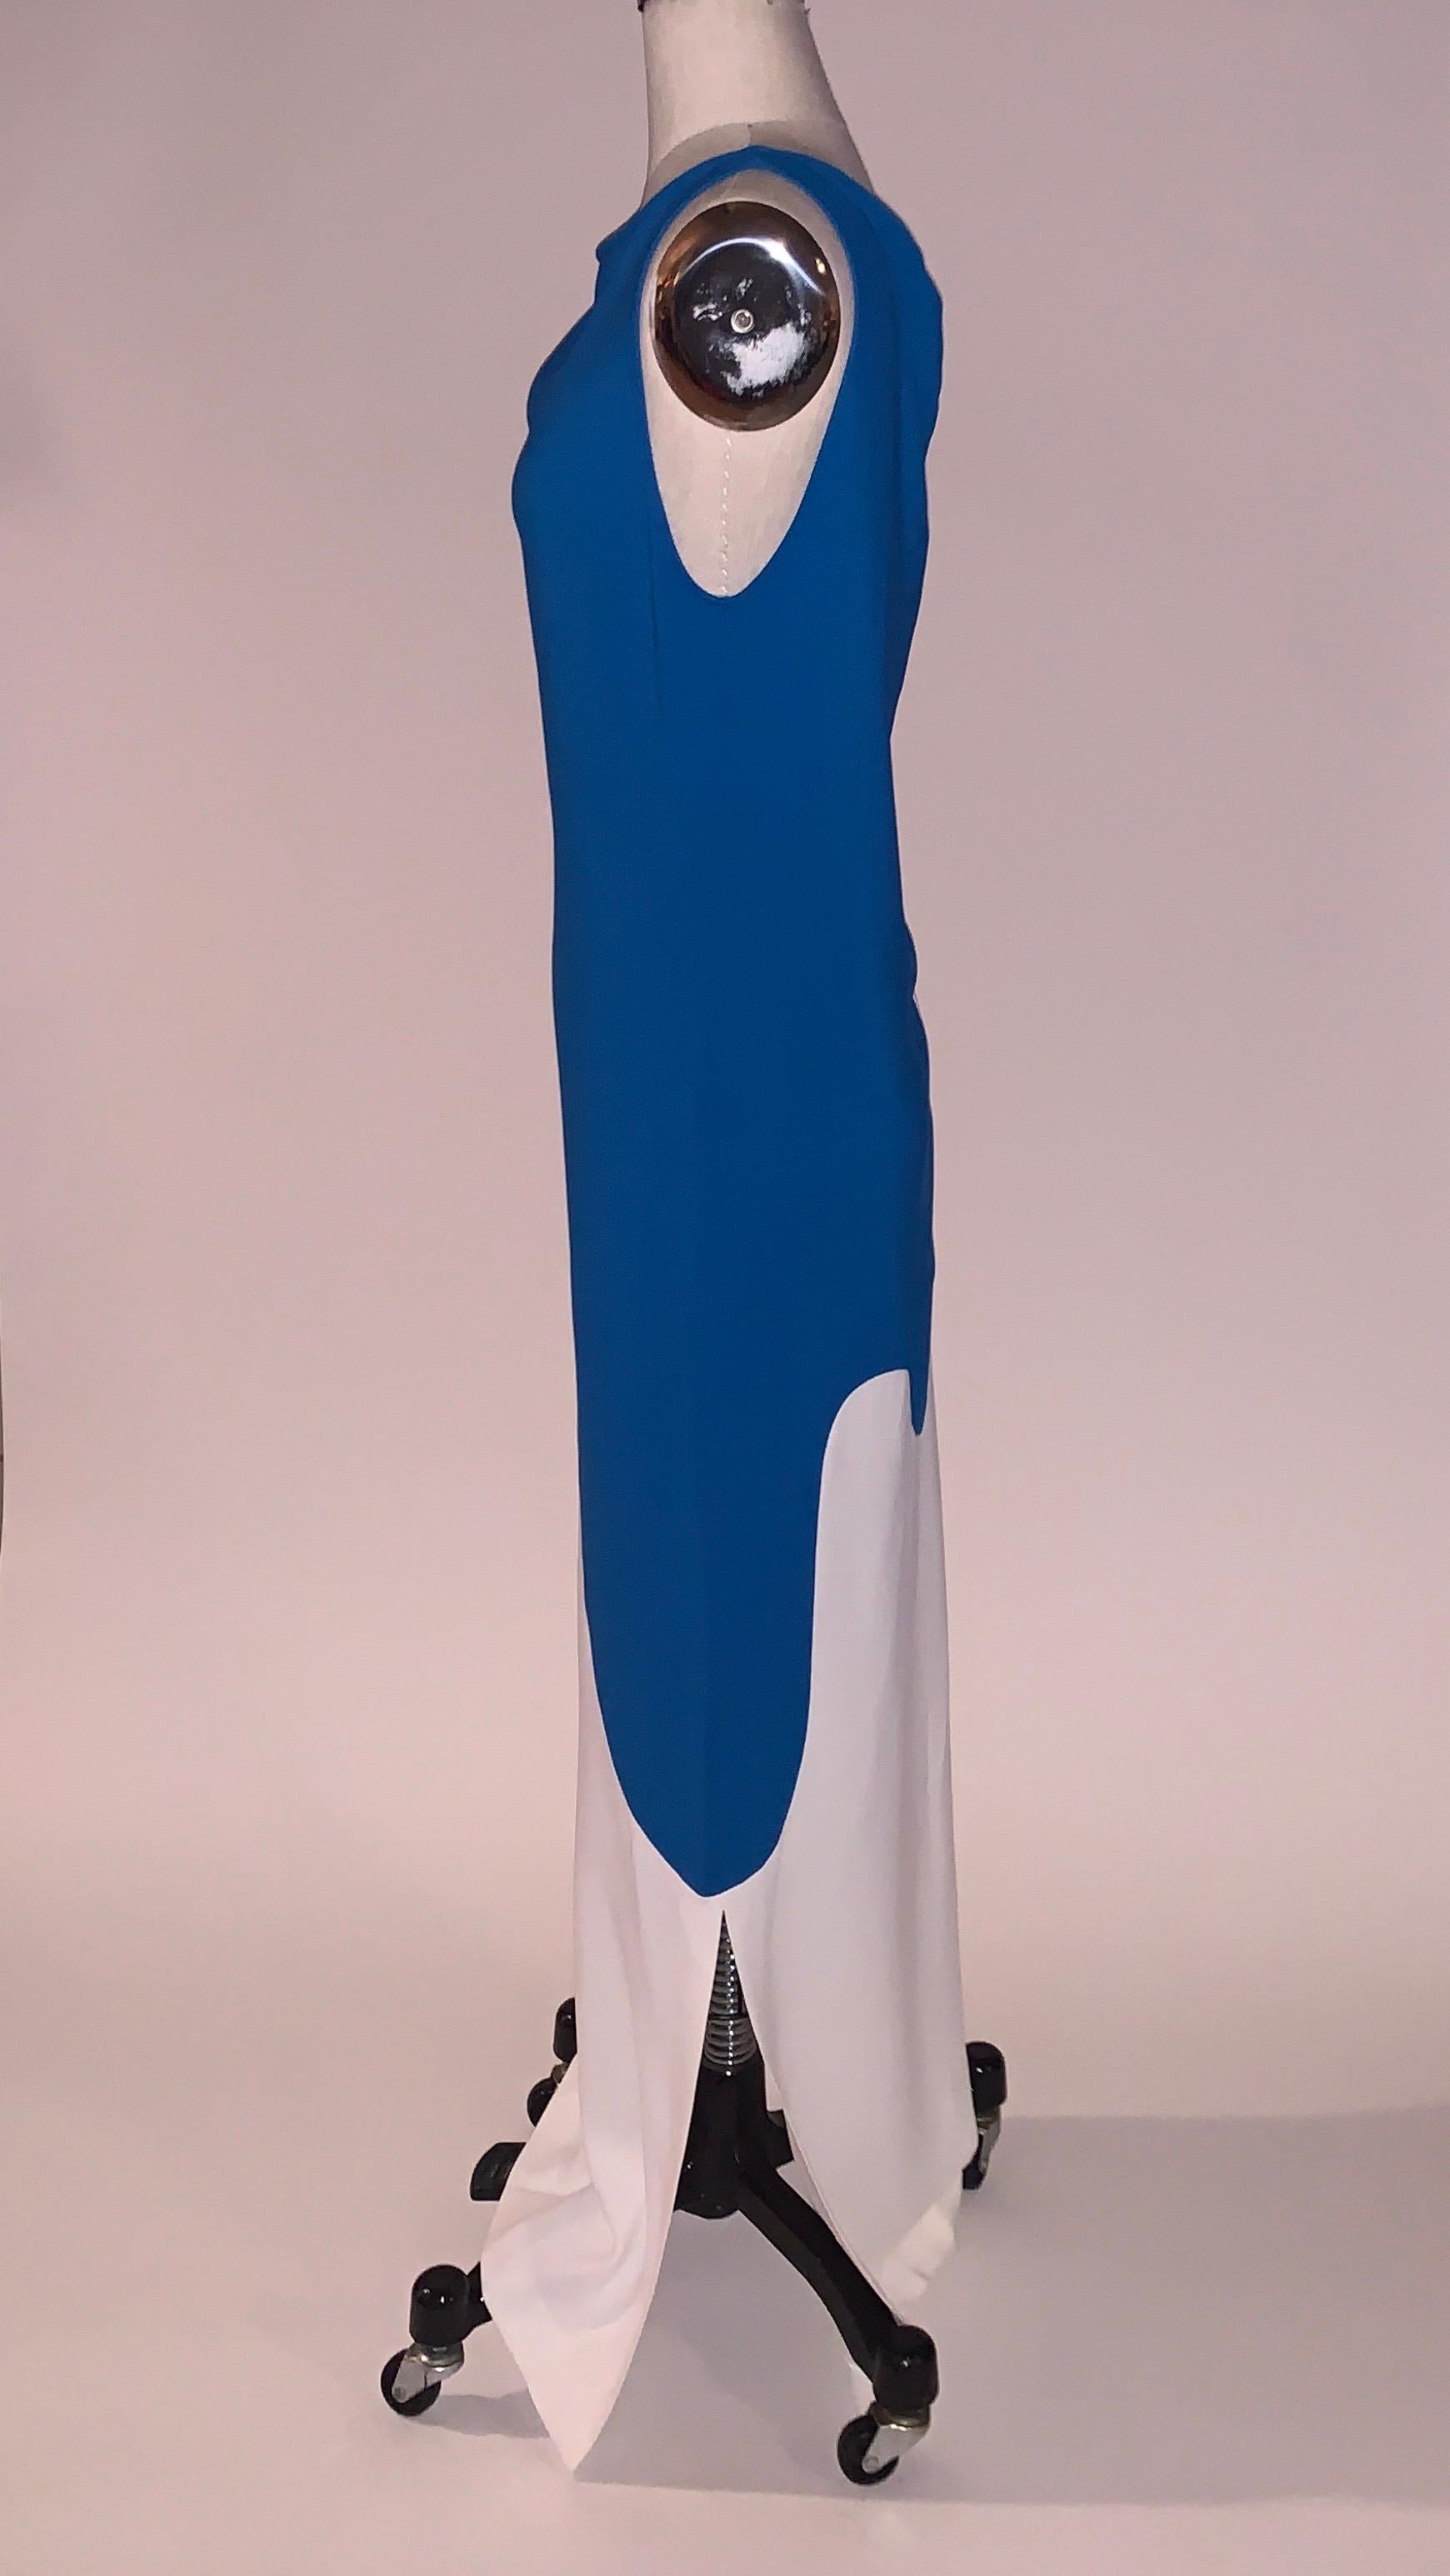 Emilio Pucci sleeveless blue and white jersey maxi column dress. Slightly loose fit at the top and more form fitting through hips. Pull-on, no zip.

95% viscose, 5% elastane.
Unlined. 

Made in Italy. 

Size IT 38, approximate US 2 or 4. See